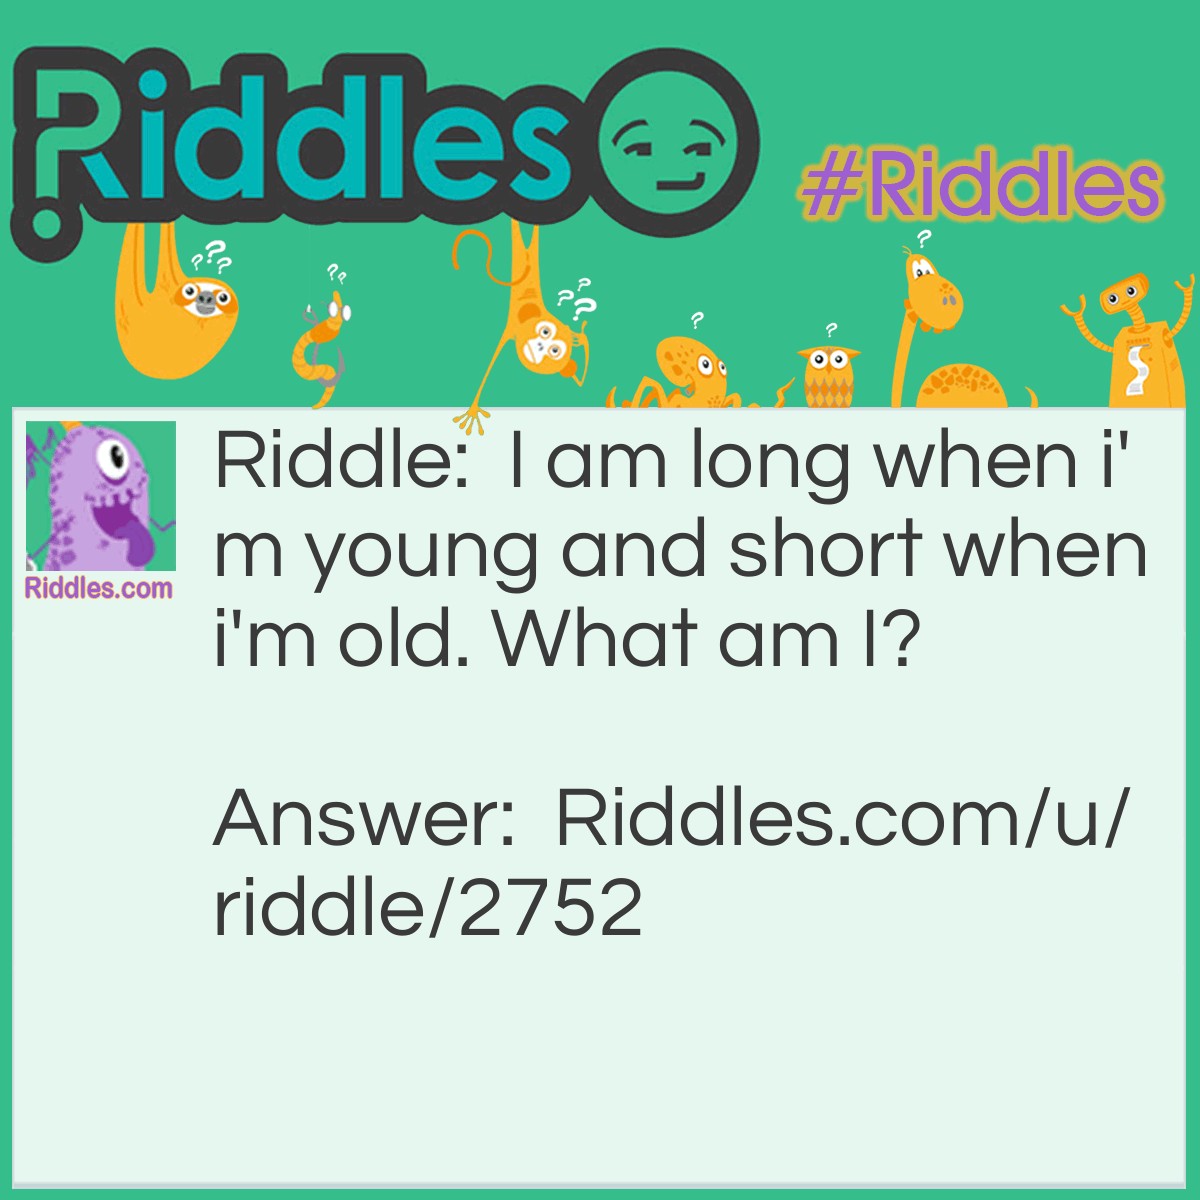 Riddle: I am long when I'm young and short when I'm old. What am I? Answer: A candle.